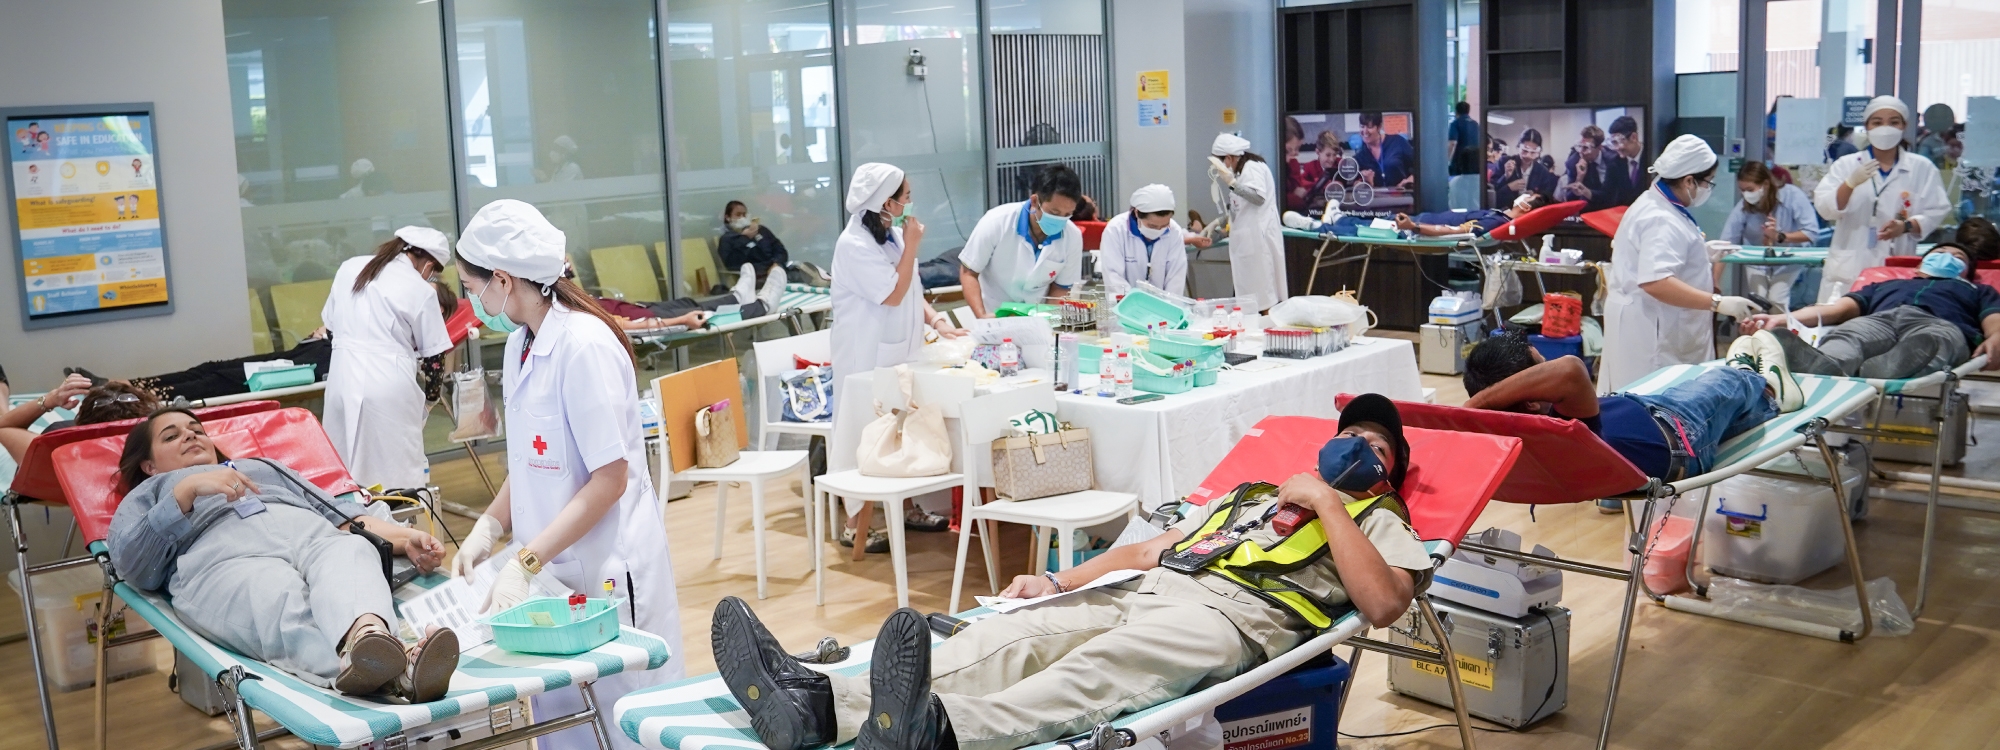 WeCare & WeShare blood donation - the small things that make the difference